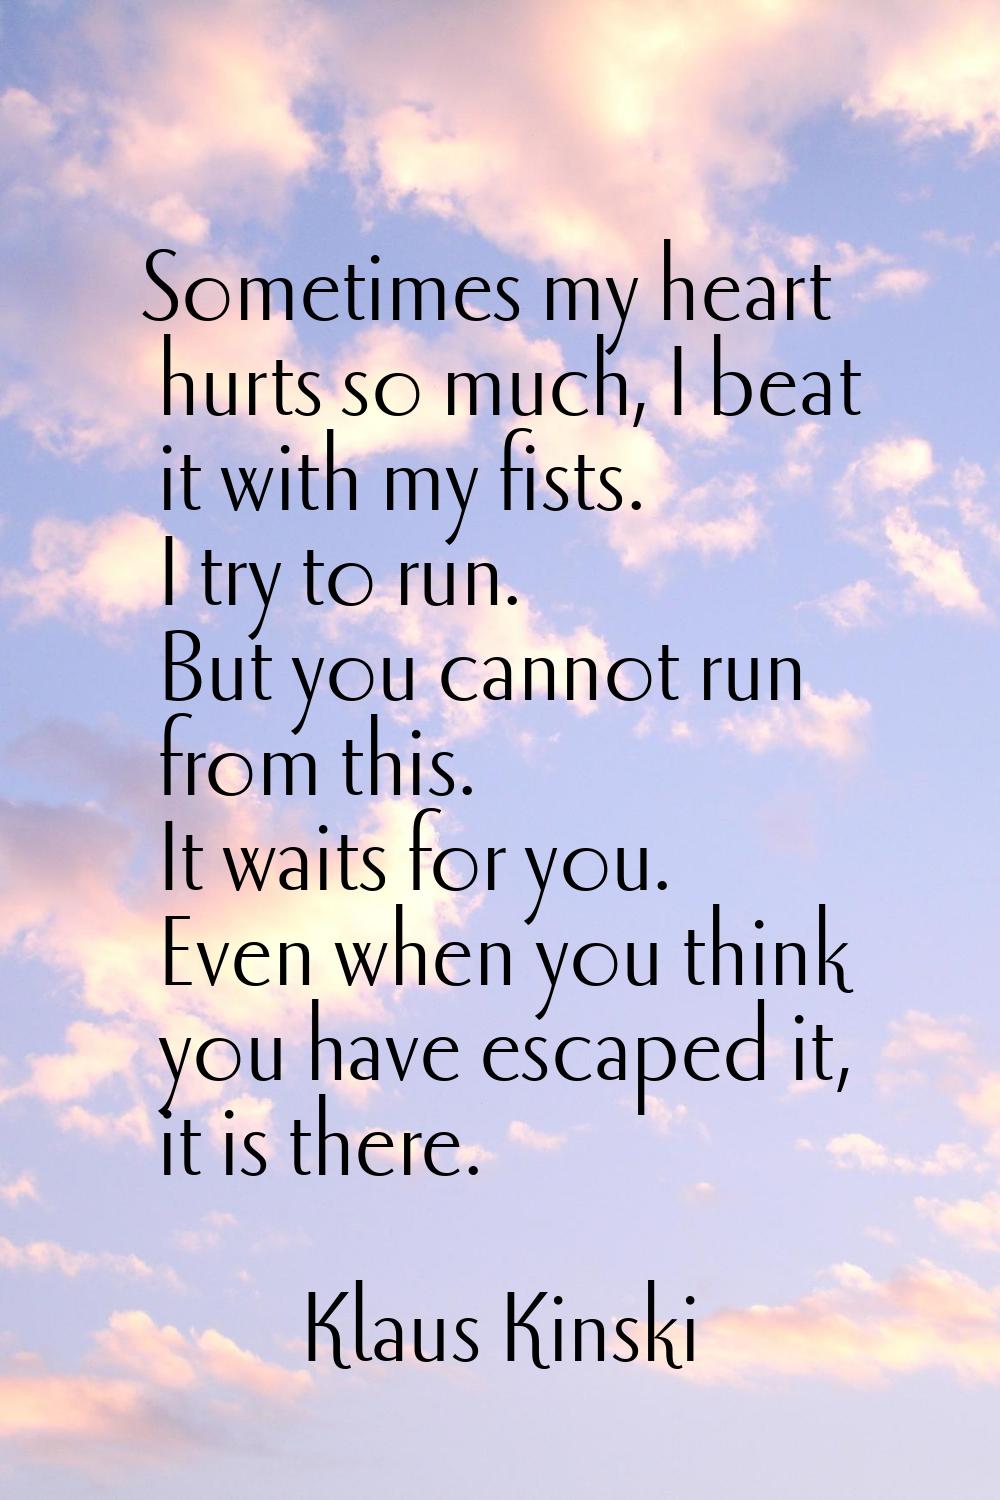 Sometimes my heart hurts so much, I beat it with my fists. I try to run. But you cannot run from th